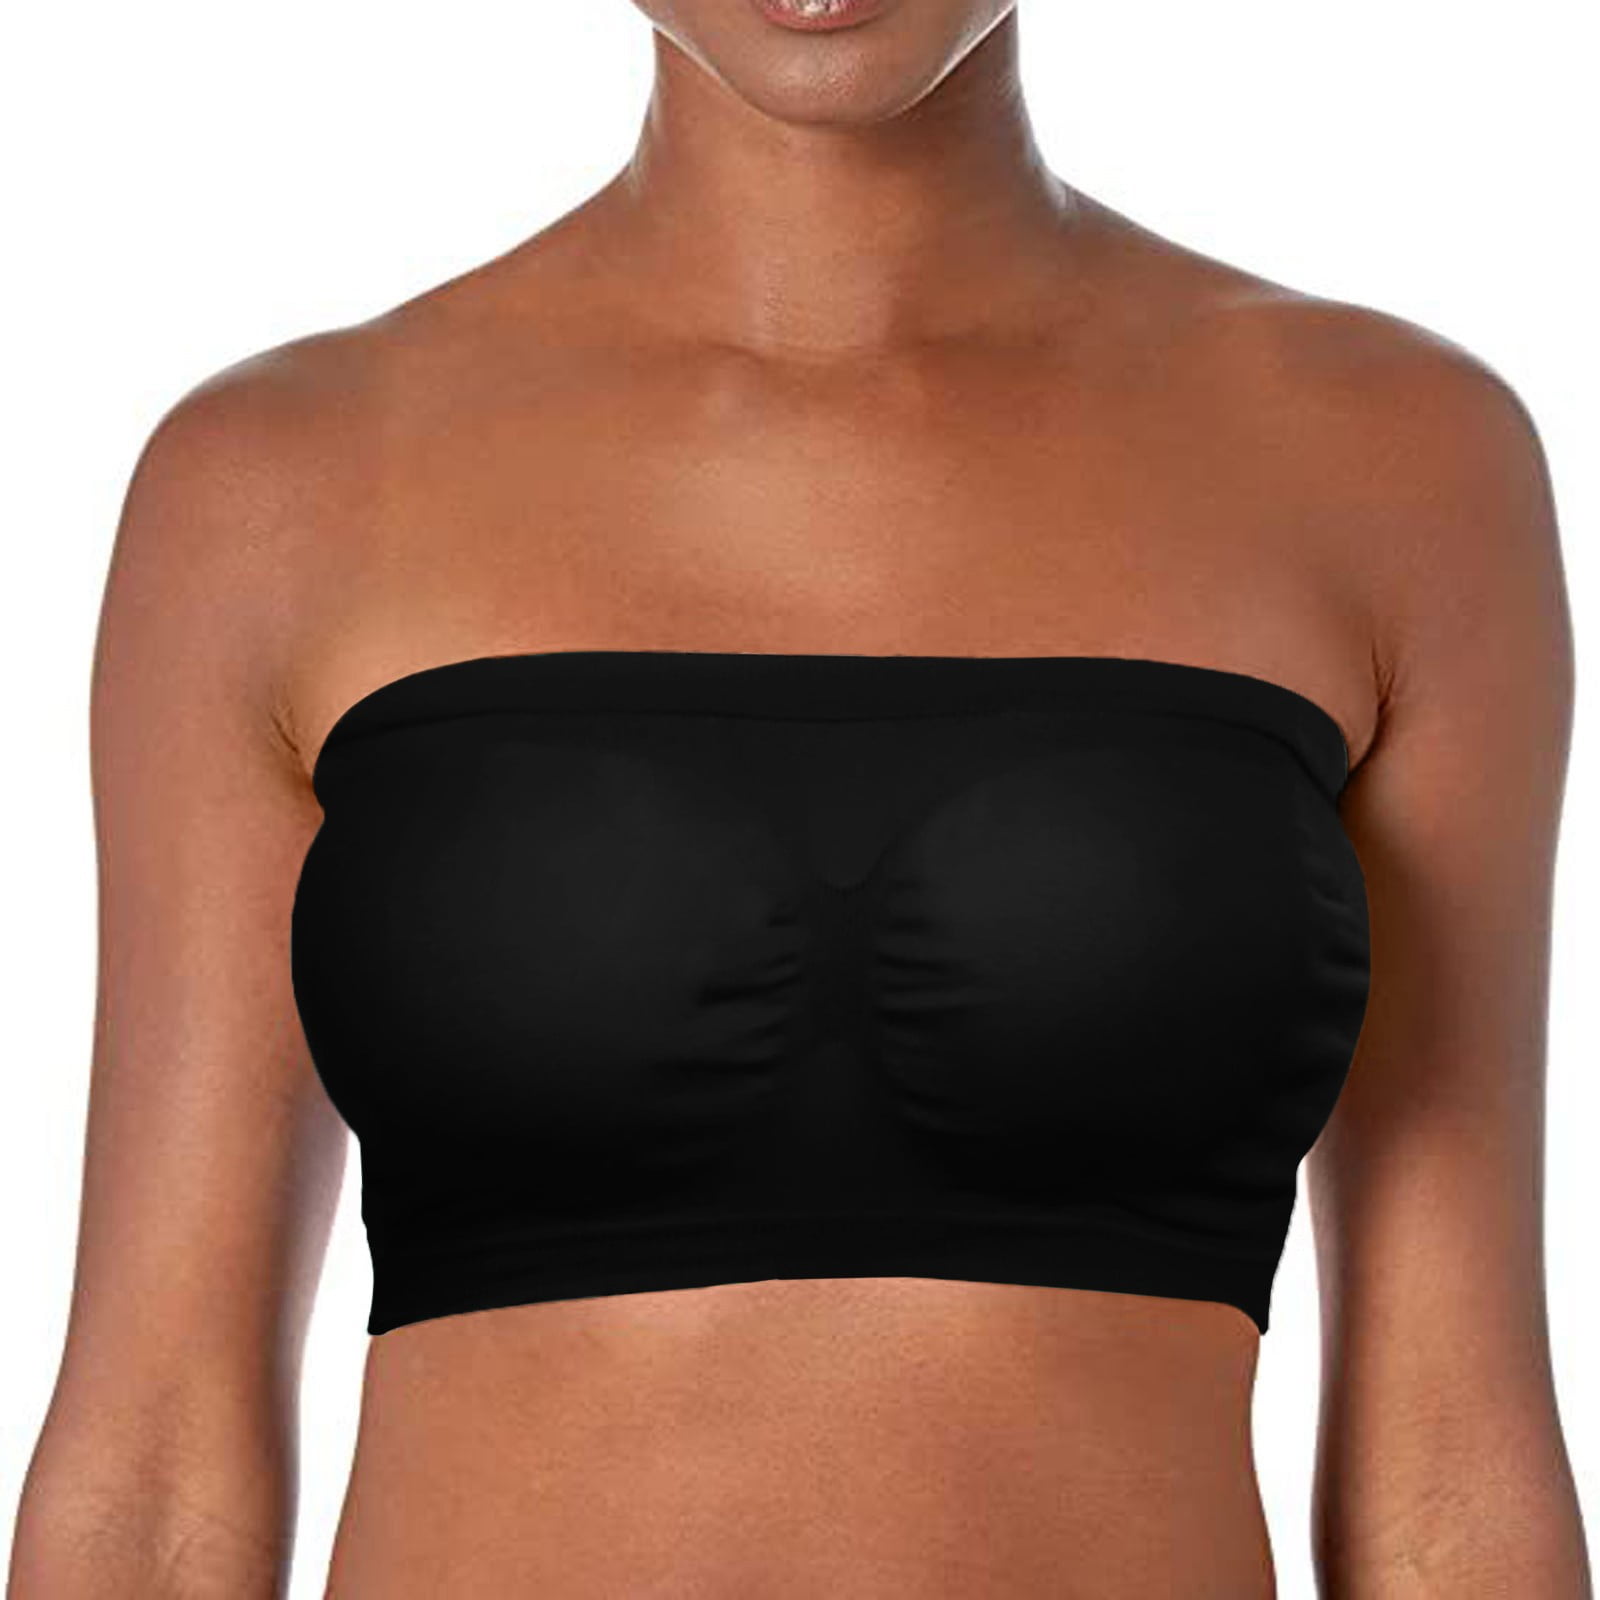 Qcmgmg Bandeaus Strapless Bras for Women Seamless Plus Size